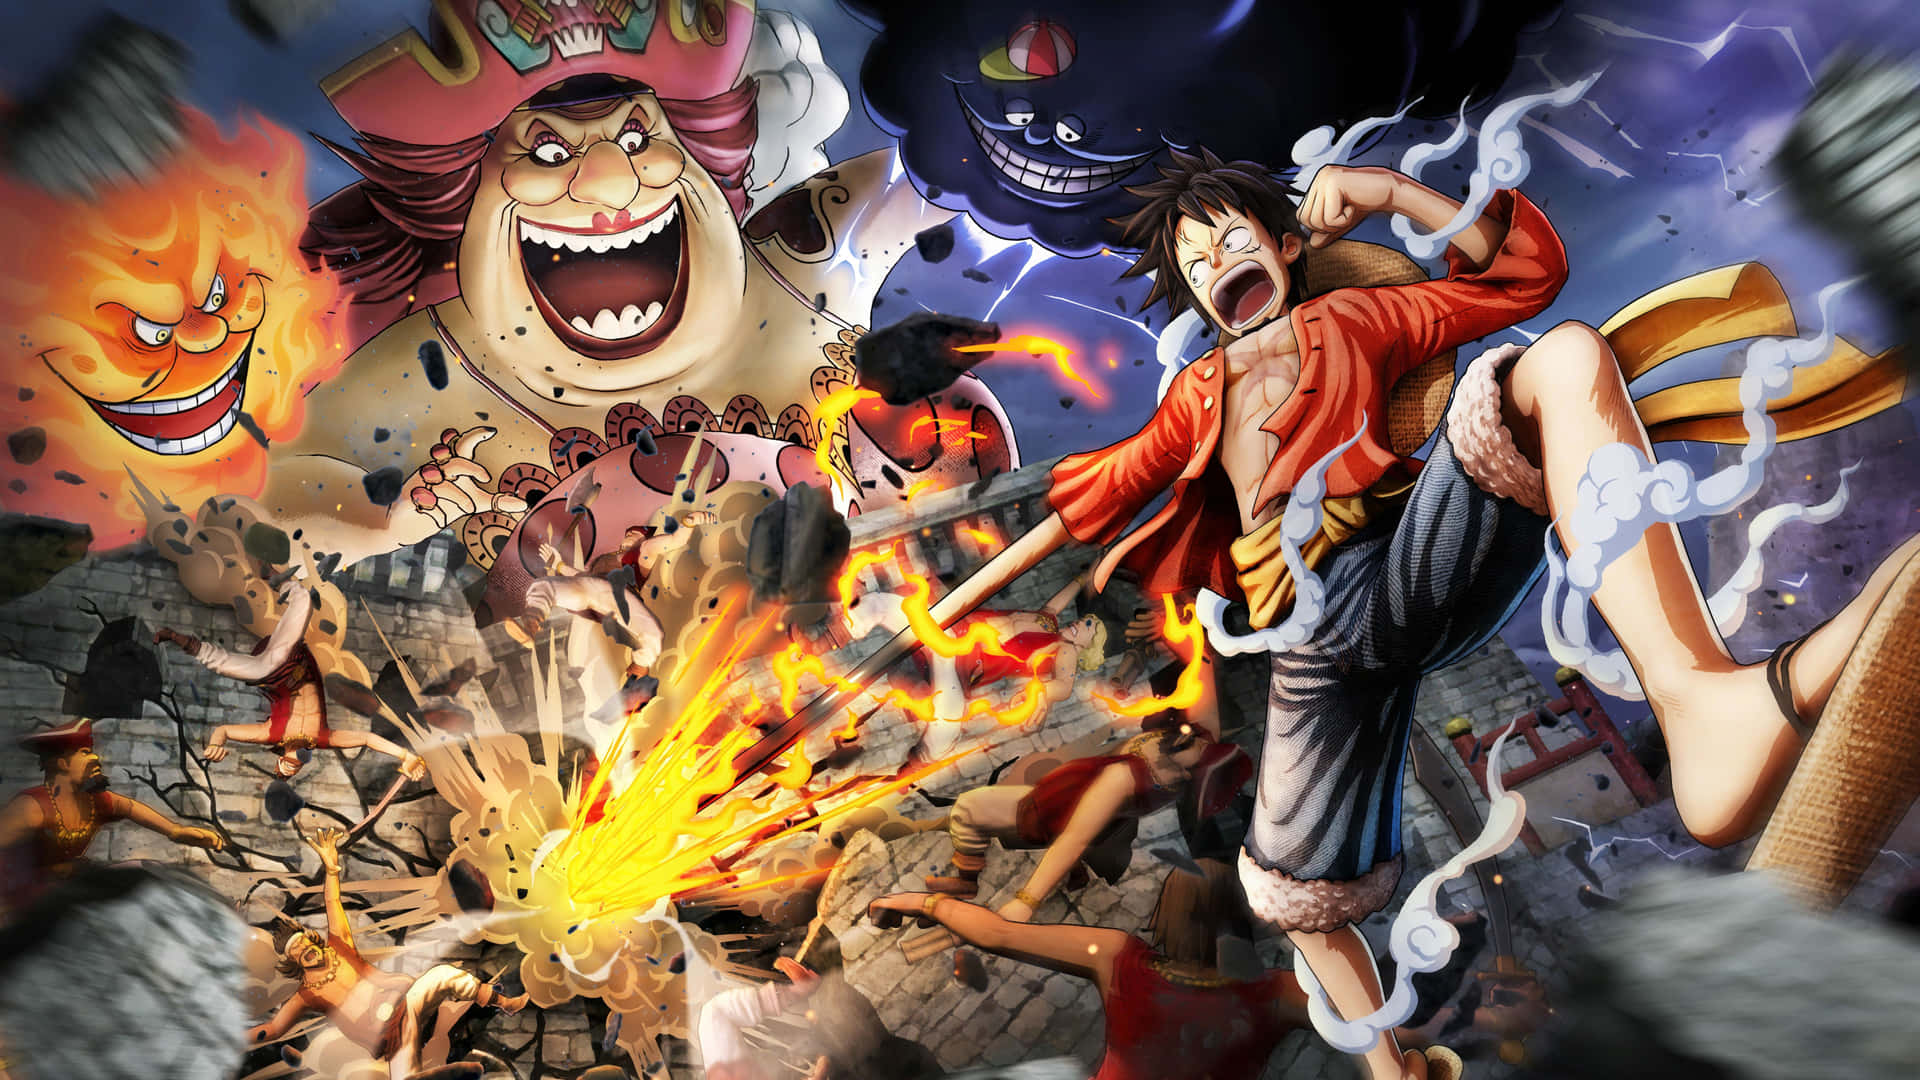 "Explore the world of the Grand Line with the one and only Straw Hat Crew!" Wallpaper